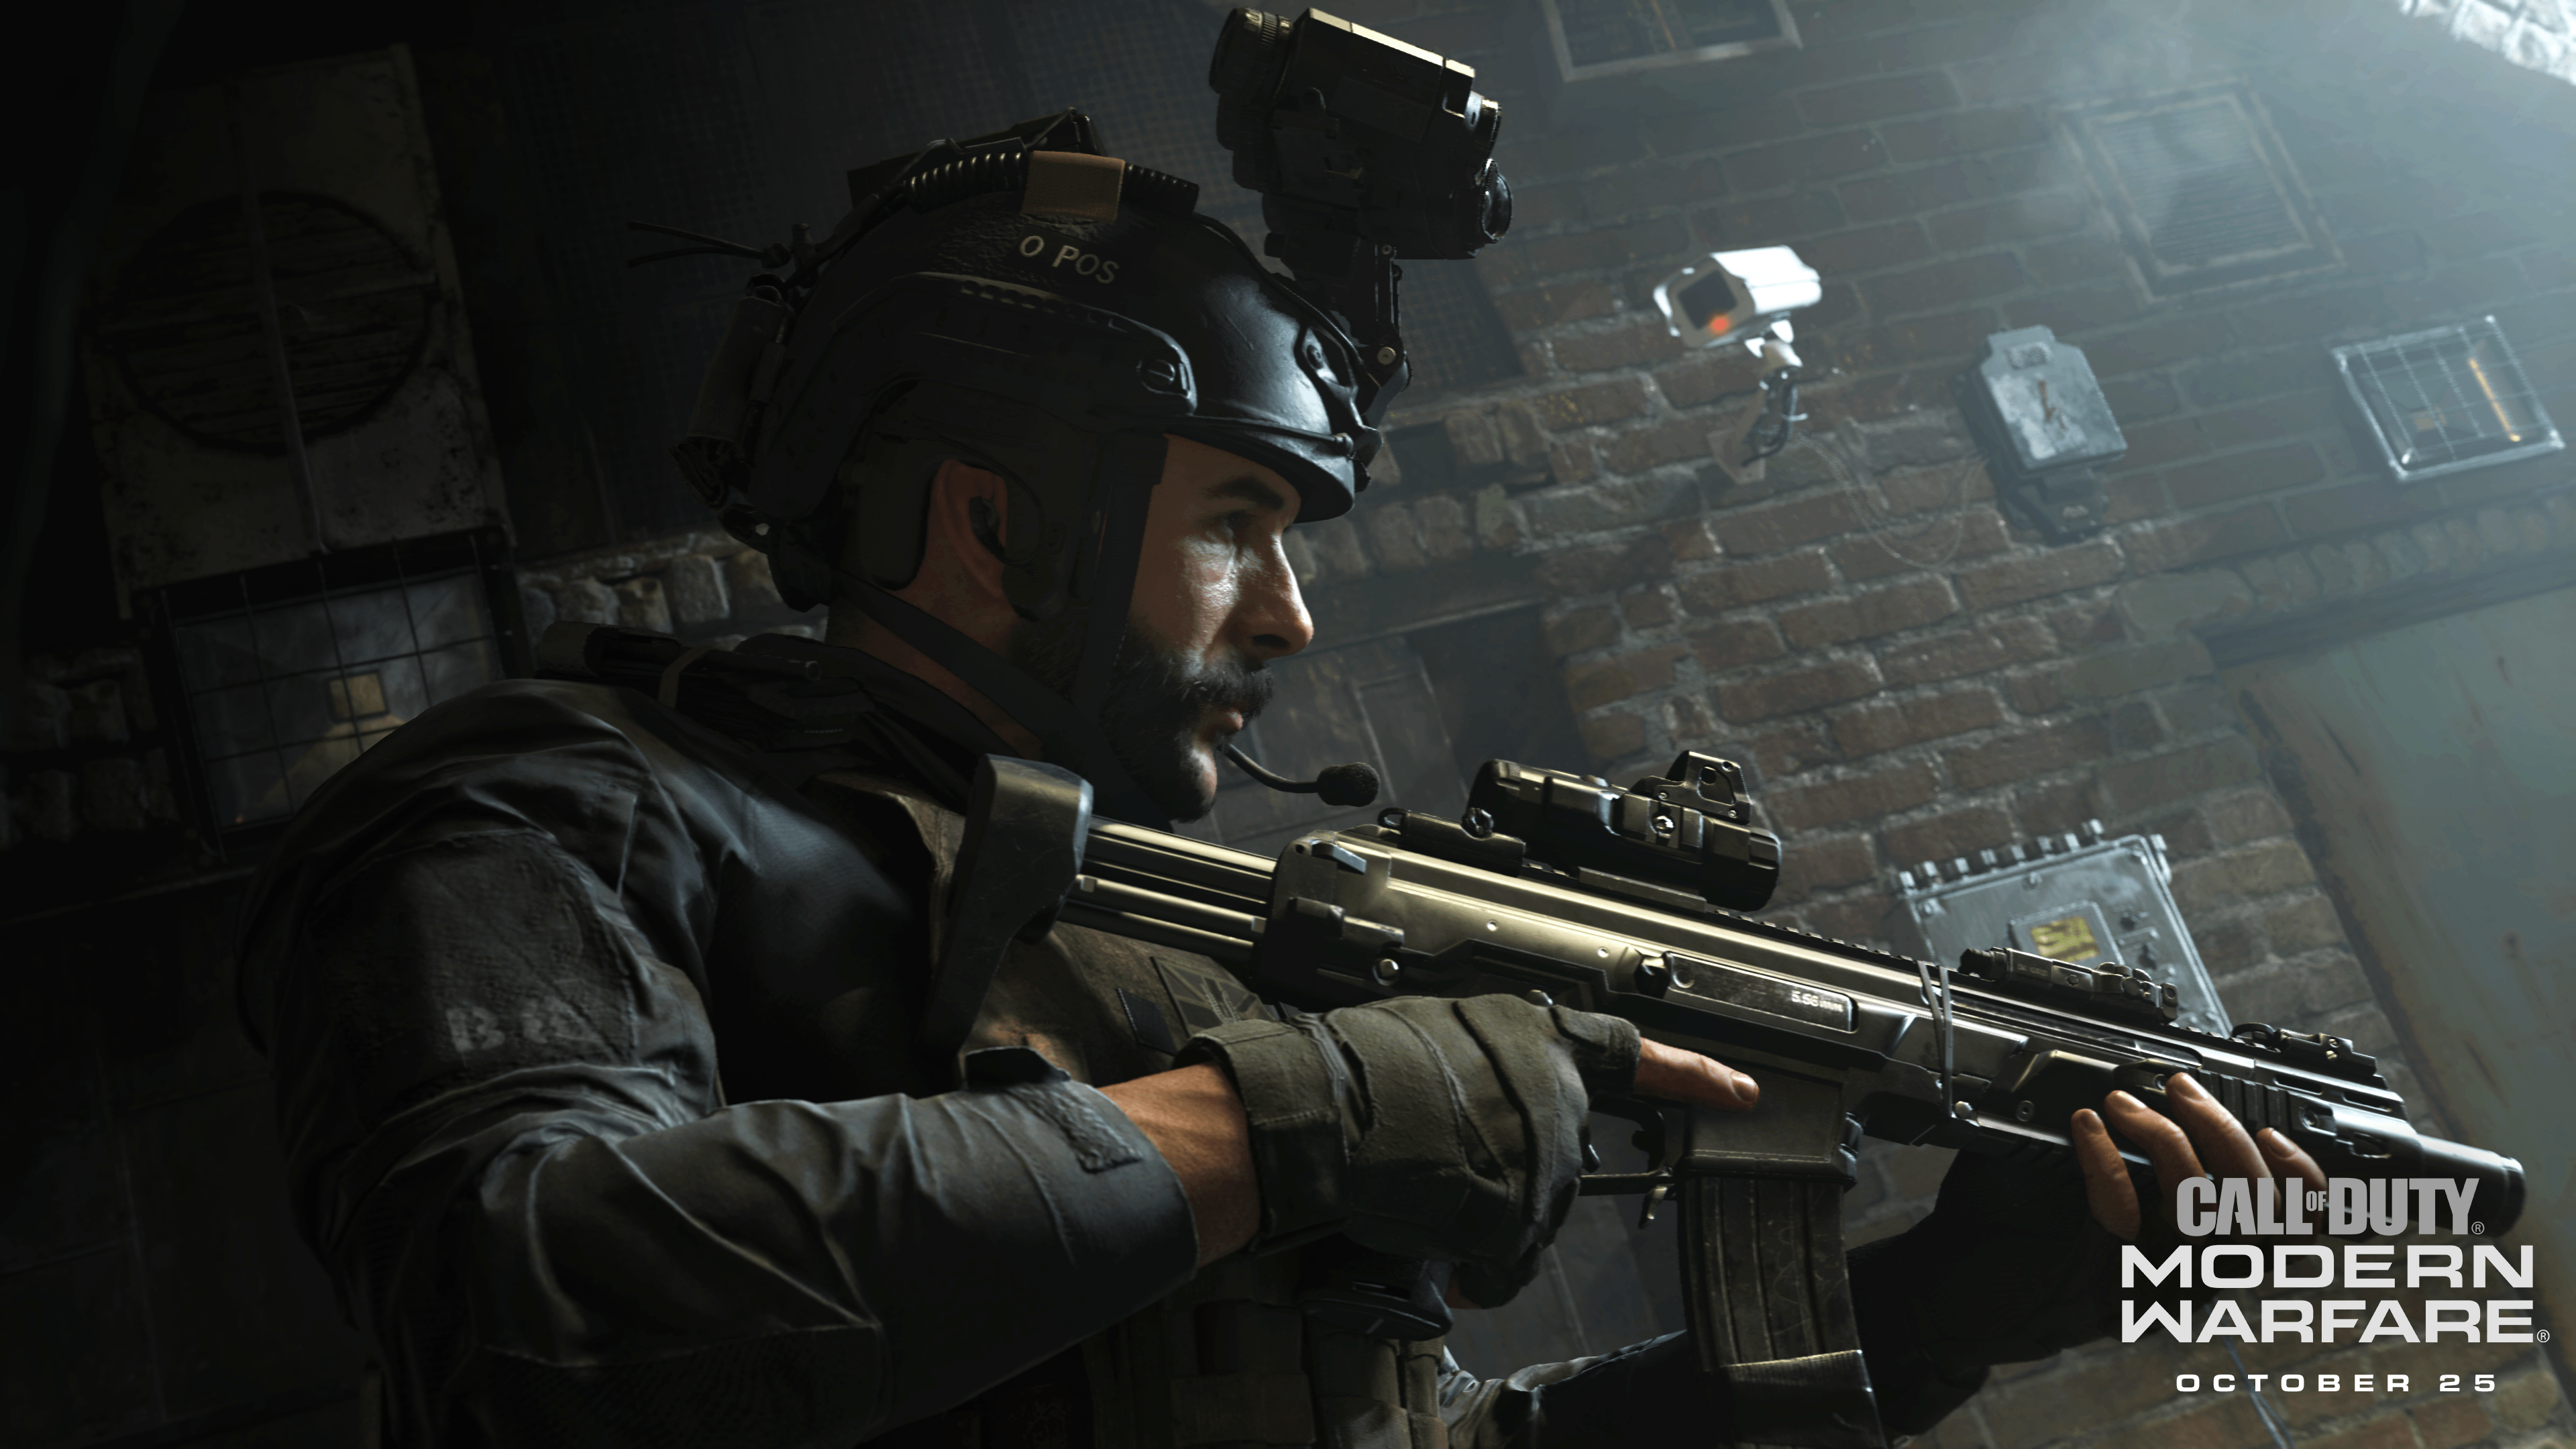 Call of Duty: Modern Warfare is a tense and daring reboot of the